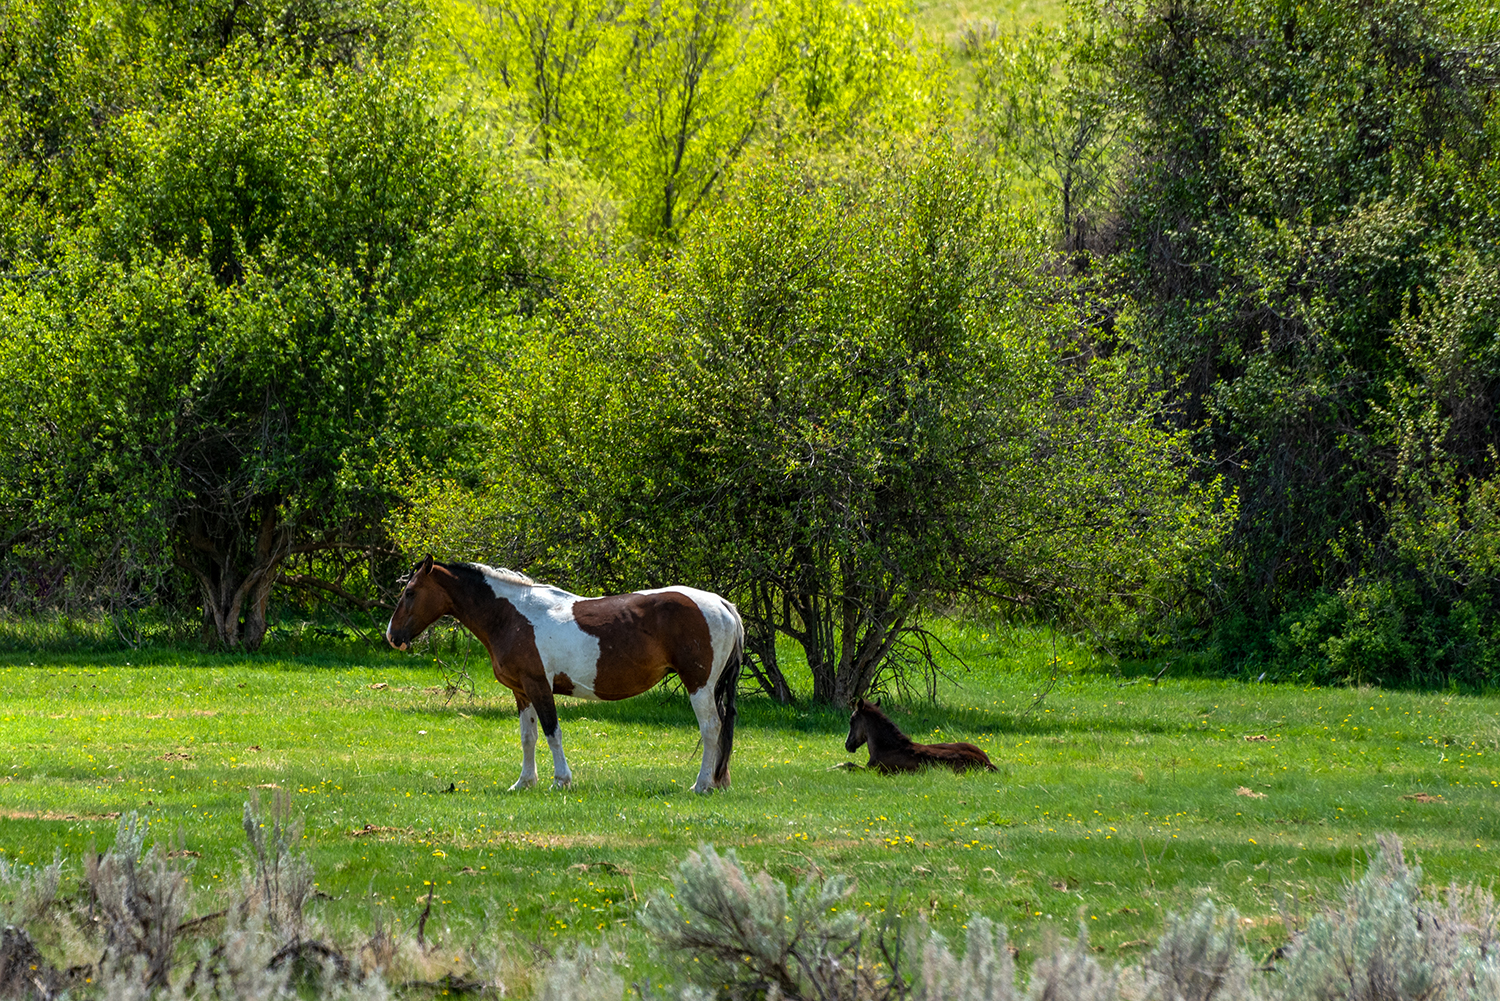 Kamloops rural life horses with trees and plants